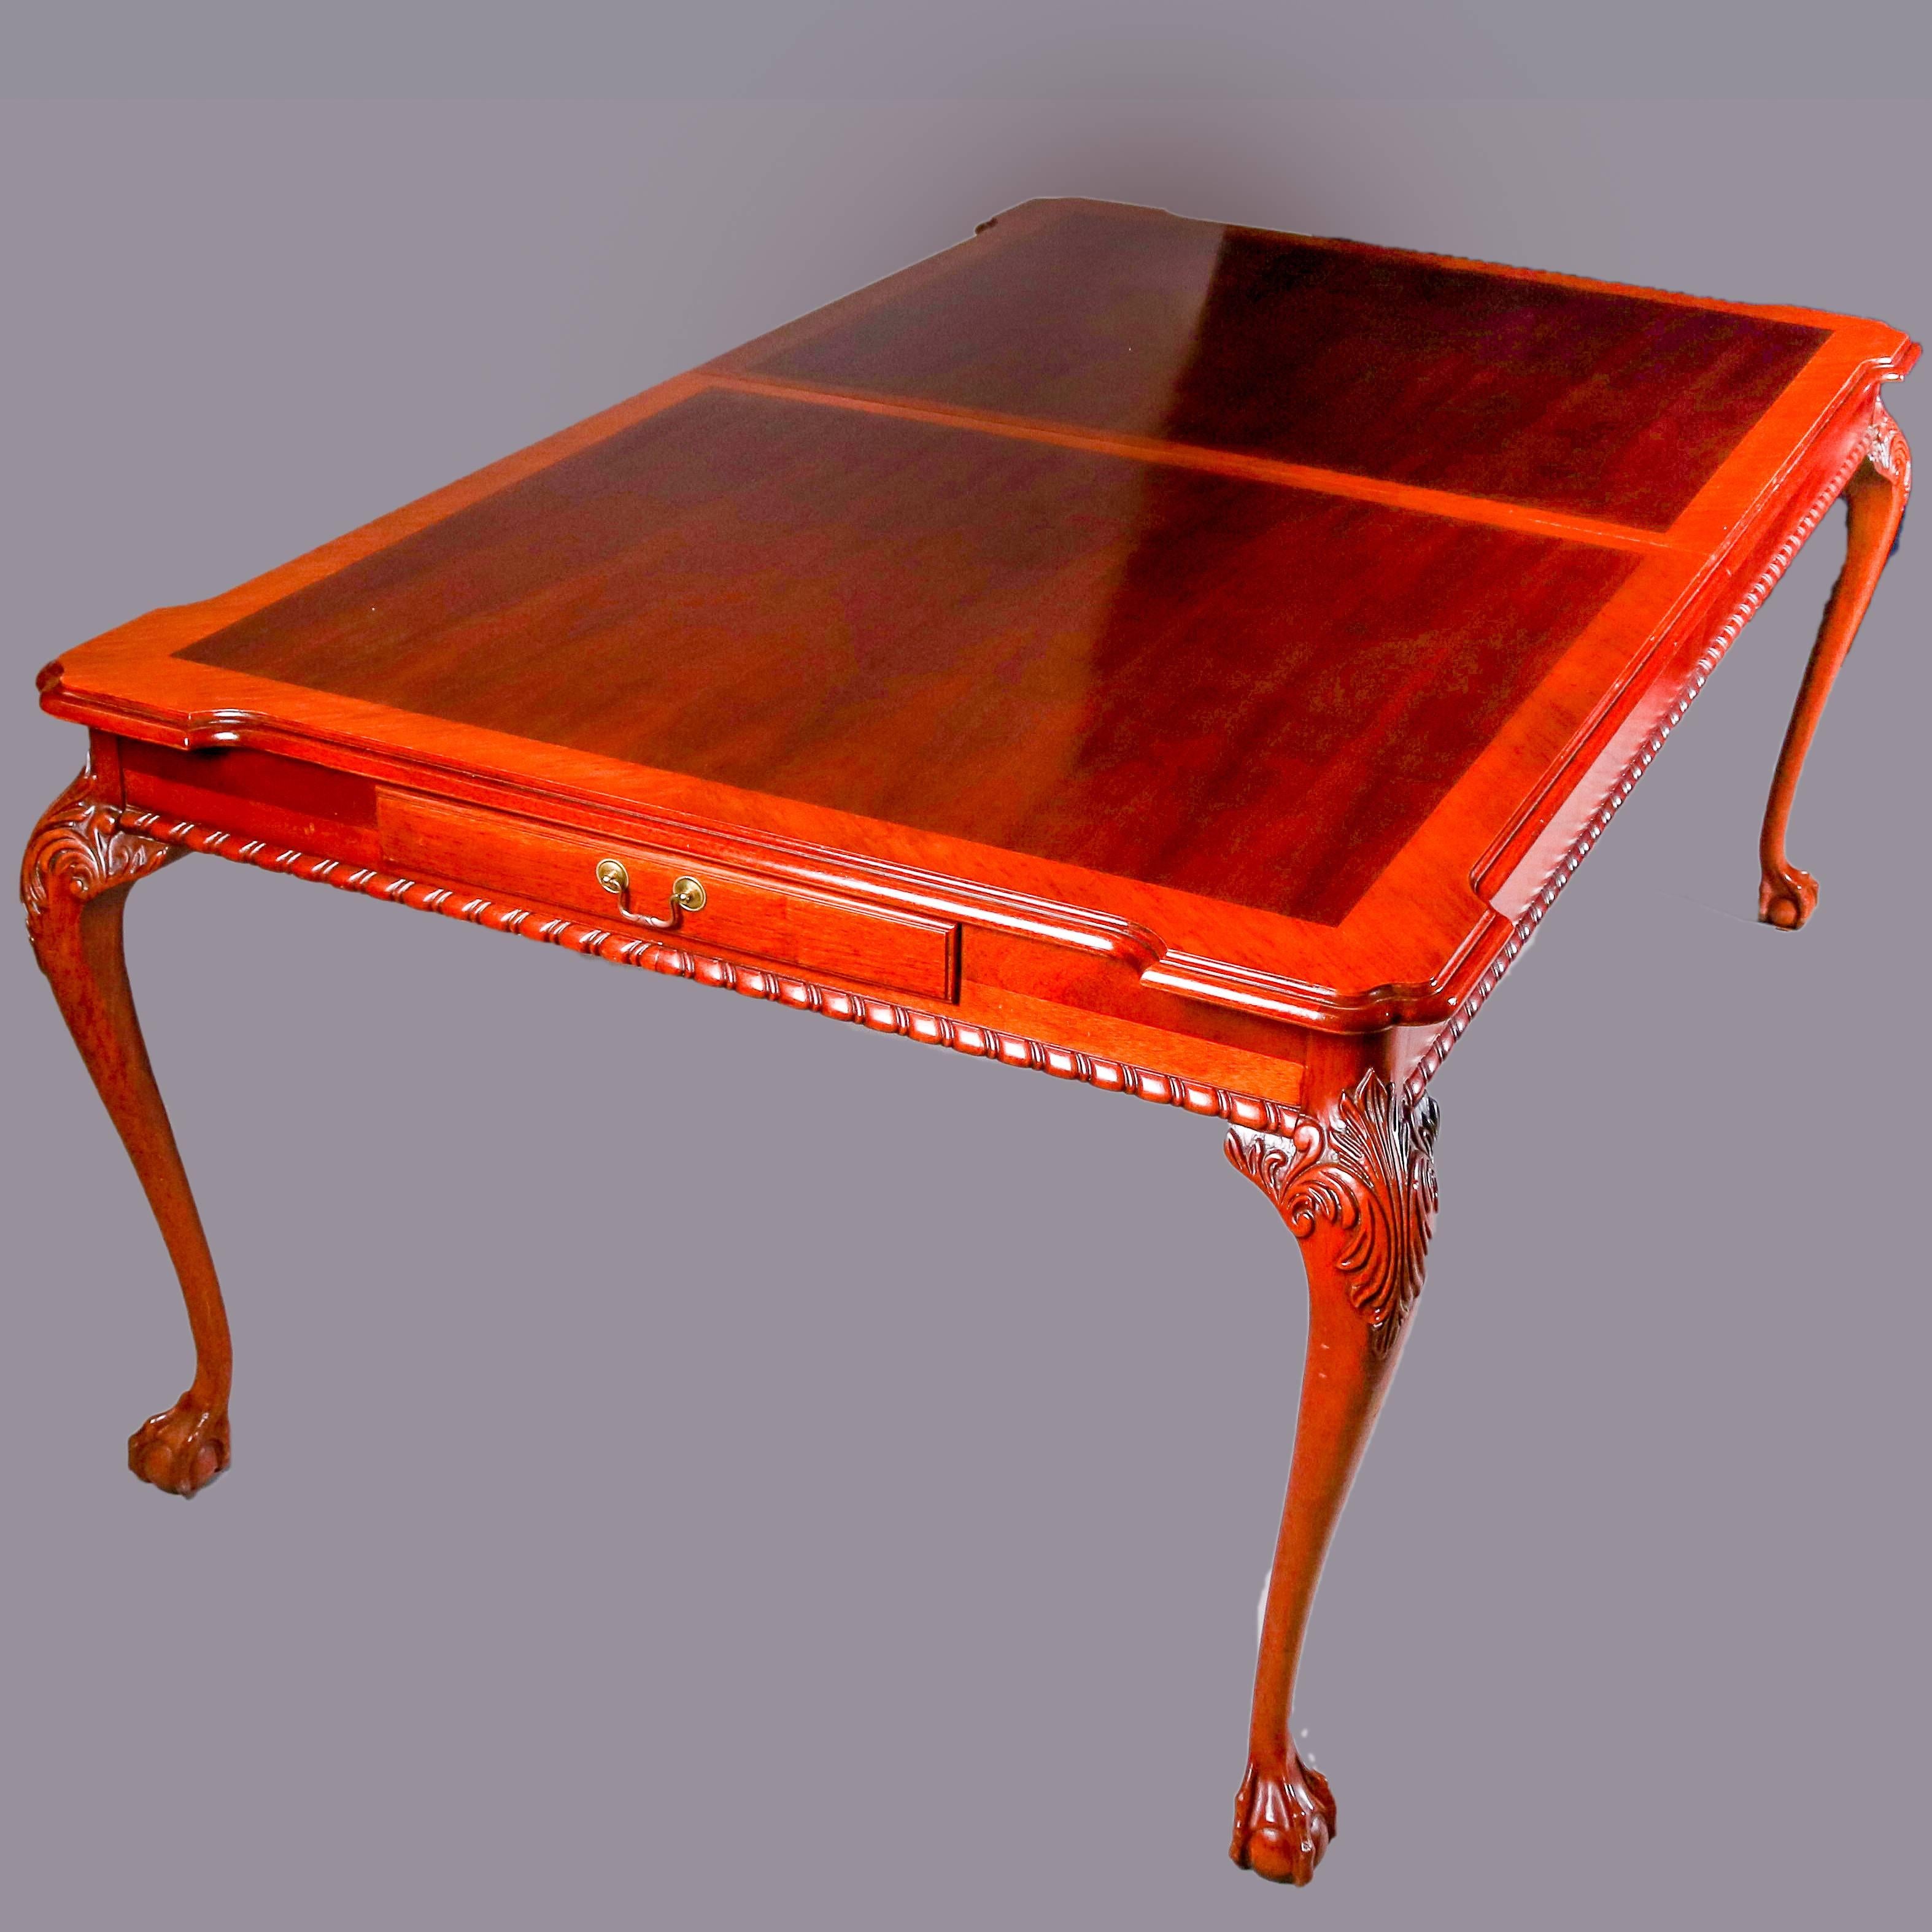 Chippendale style mahogany dining table features shaped two toned dining surface above twisted rope apron and including silverware drawers, seated on cabriole legs with carved acanthus knees and terminating in claw and ball feet, two matching two